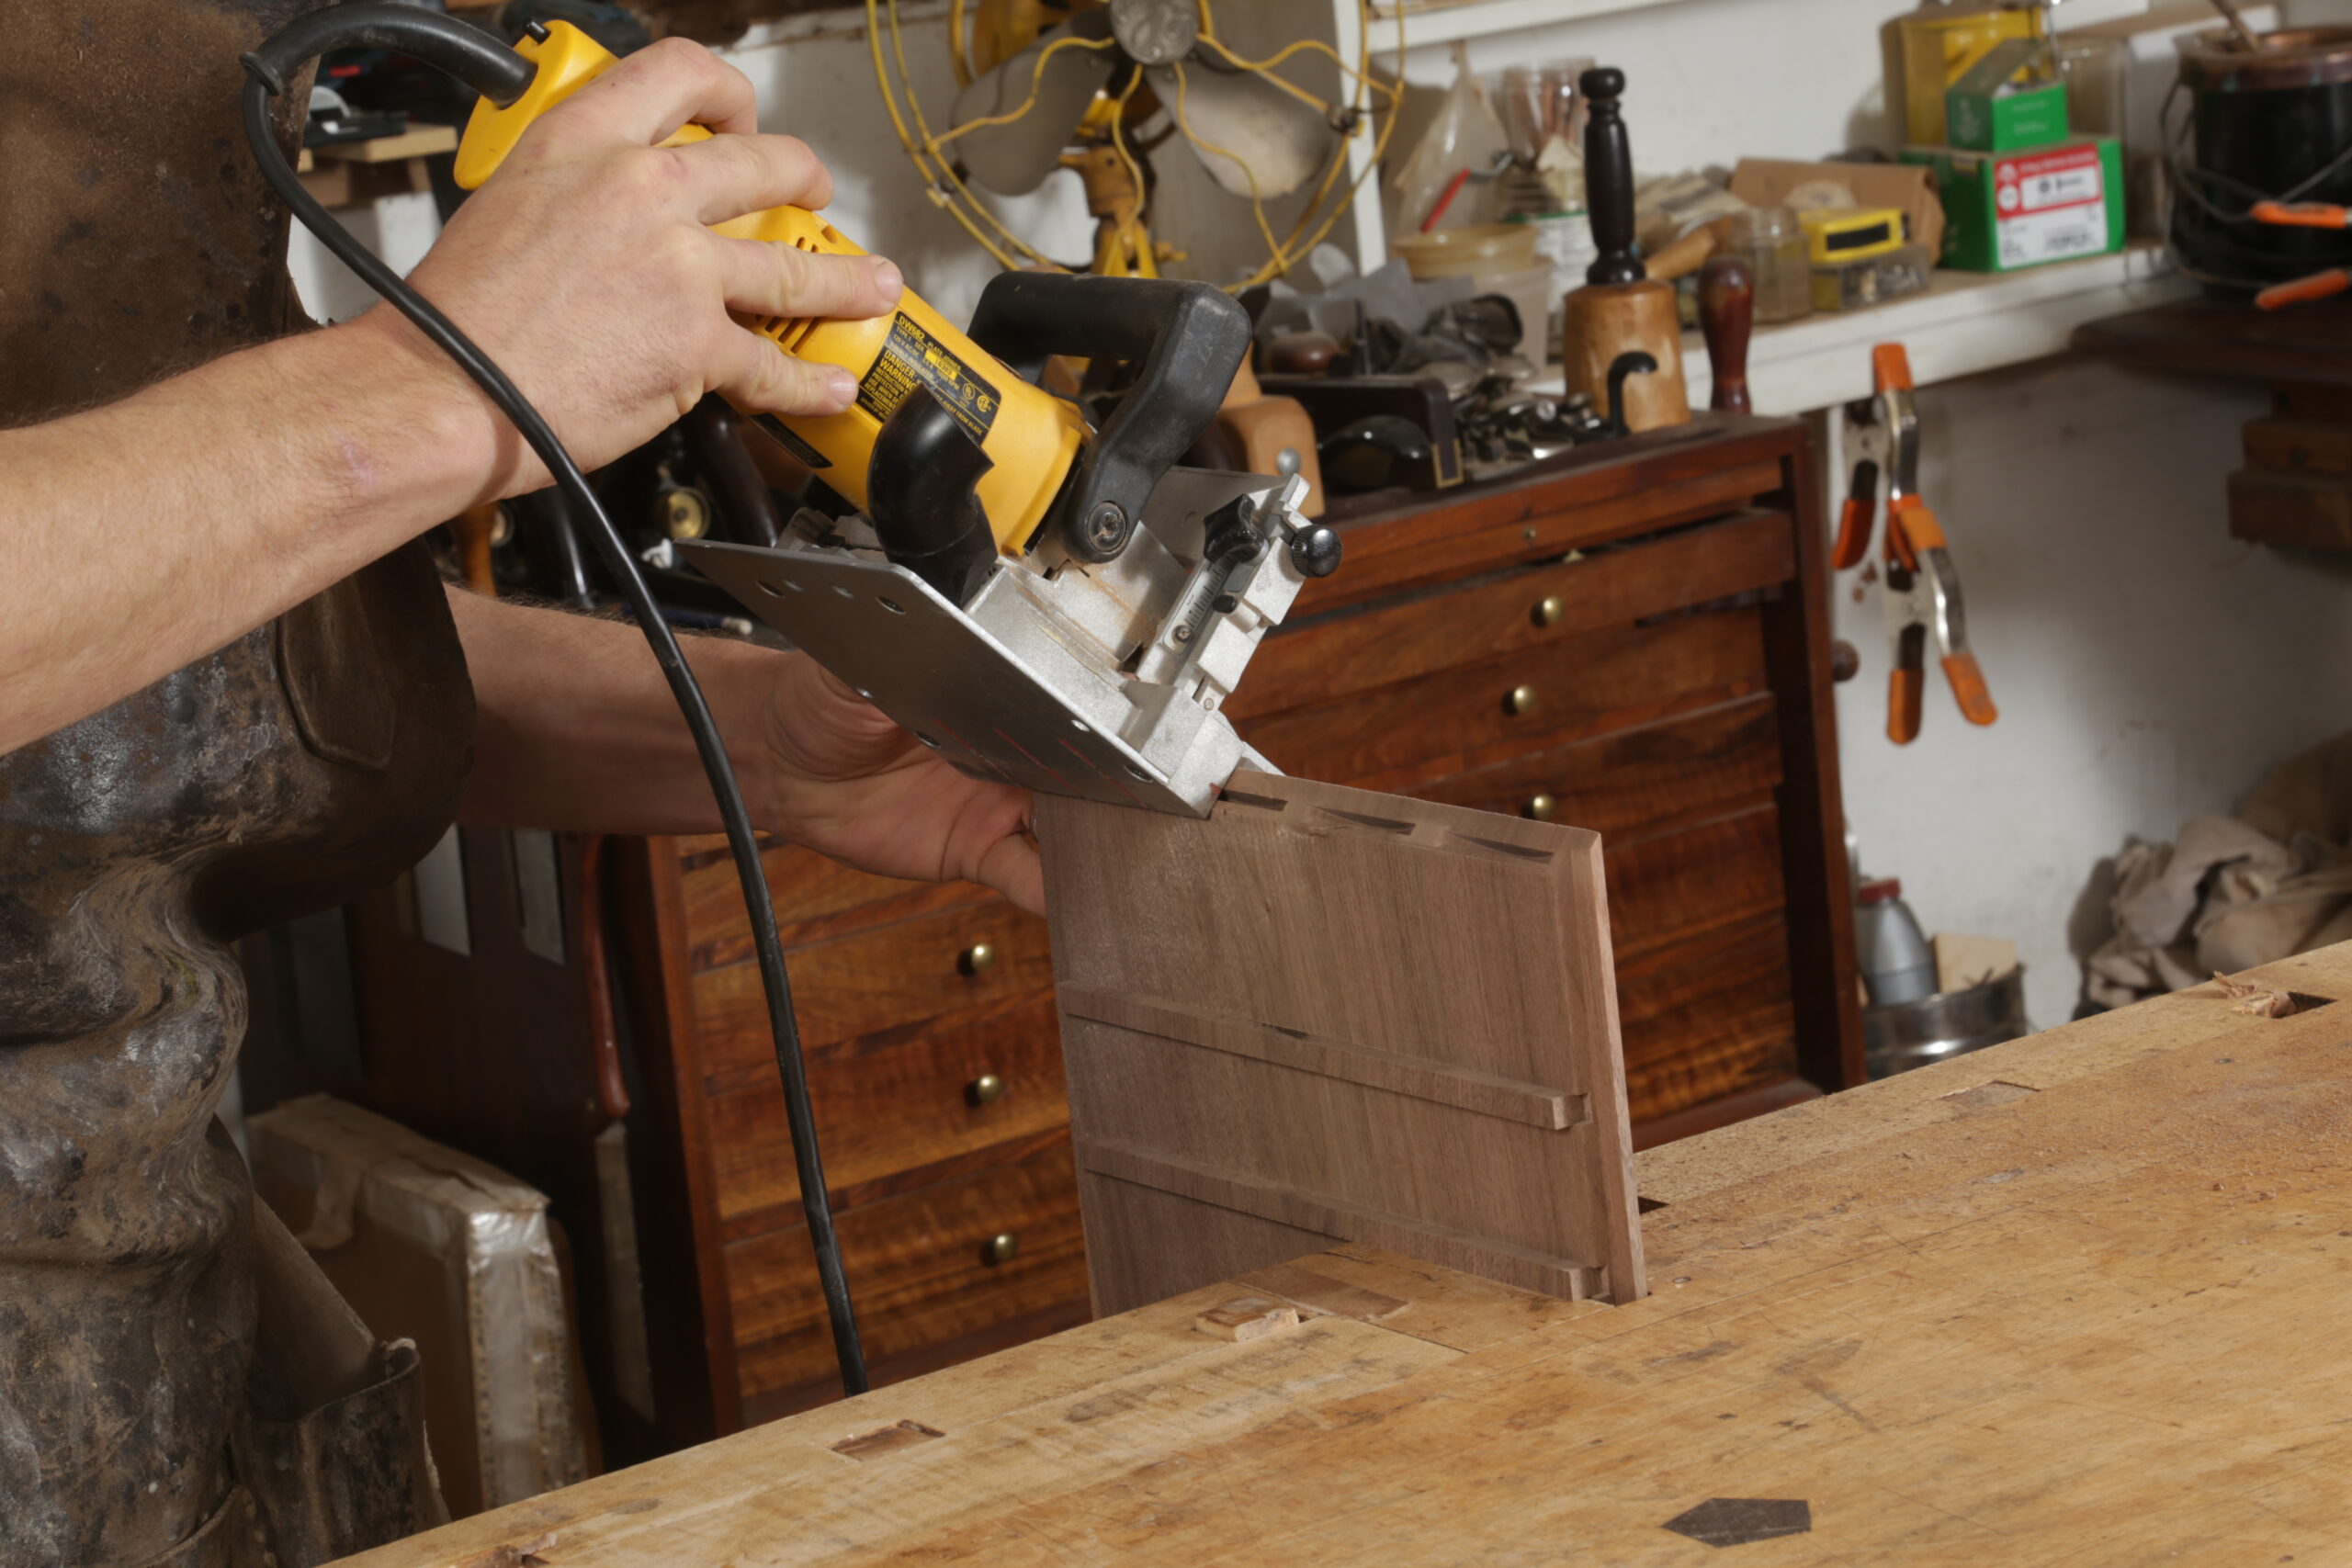 With the box held upright at the workbench, the author is using a biscuit joiner to cut slots in a mitered end. The slots are thin, and there are four of them along the miter. The biscuit joiner is predominantly yellow.